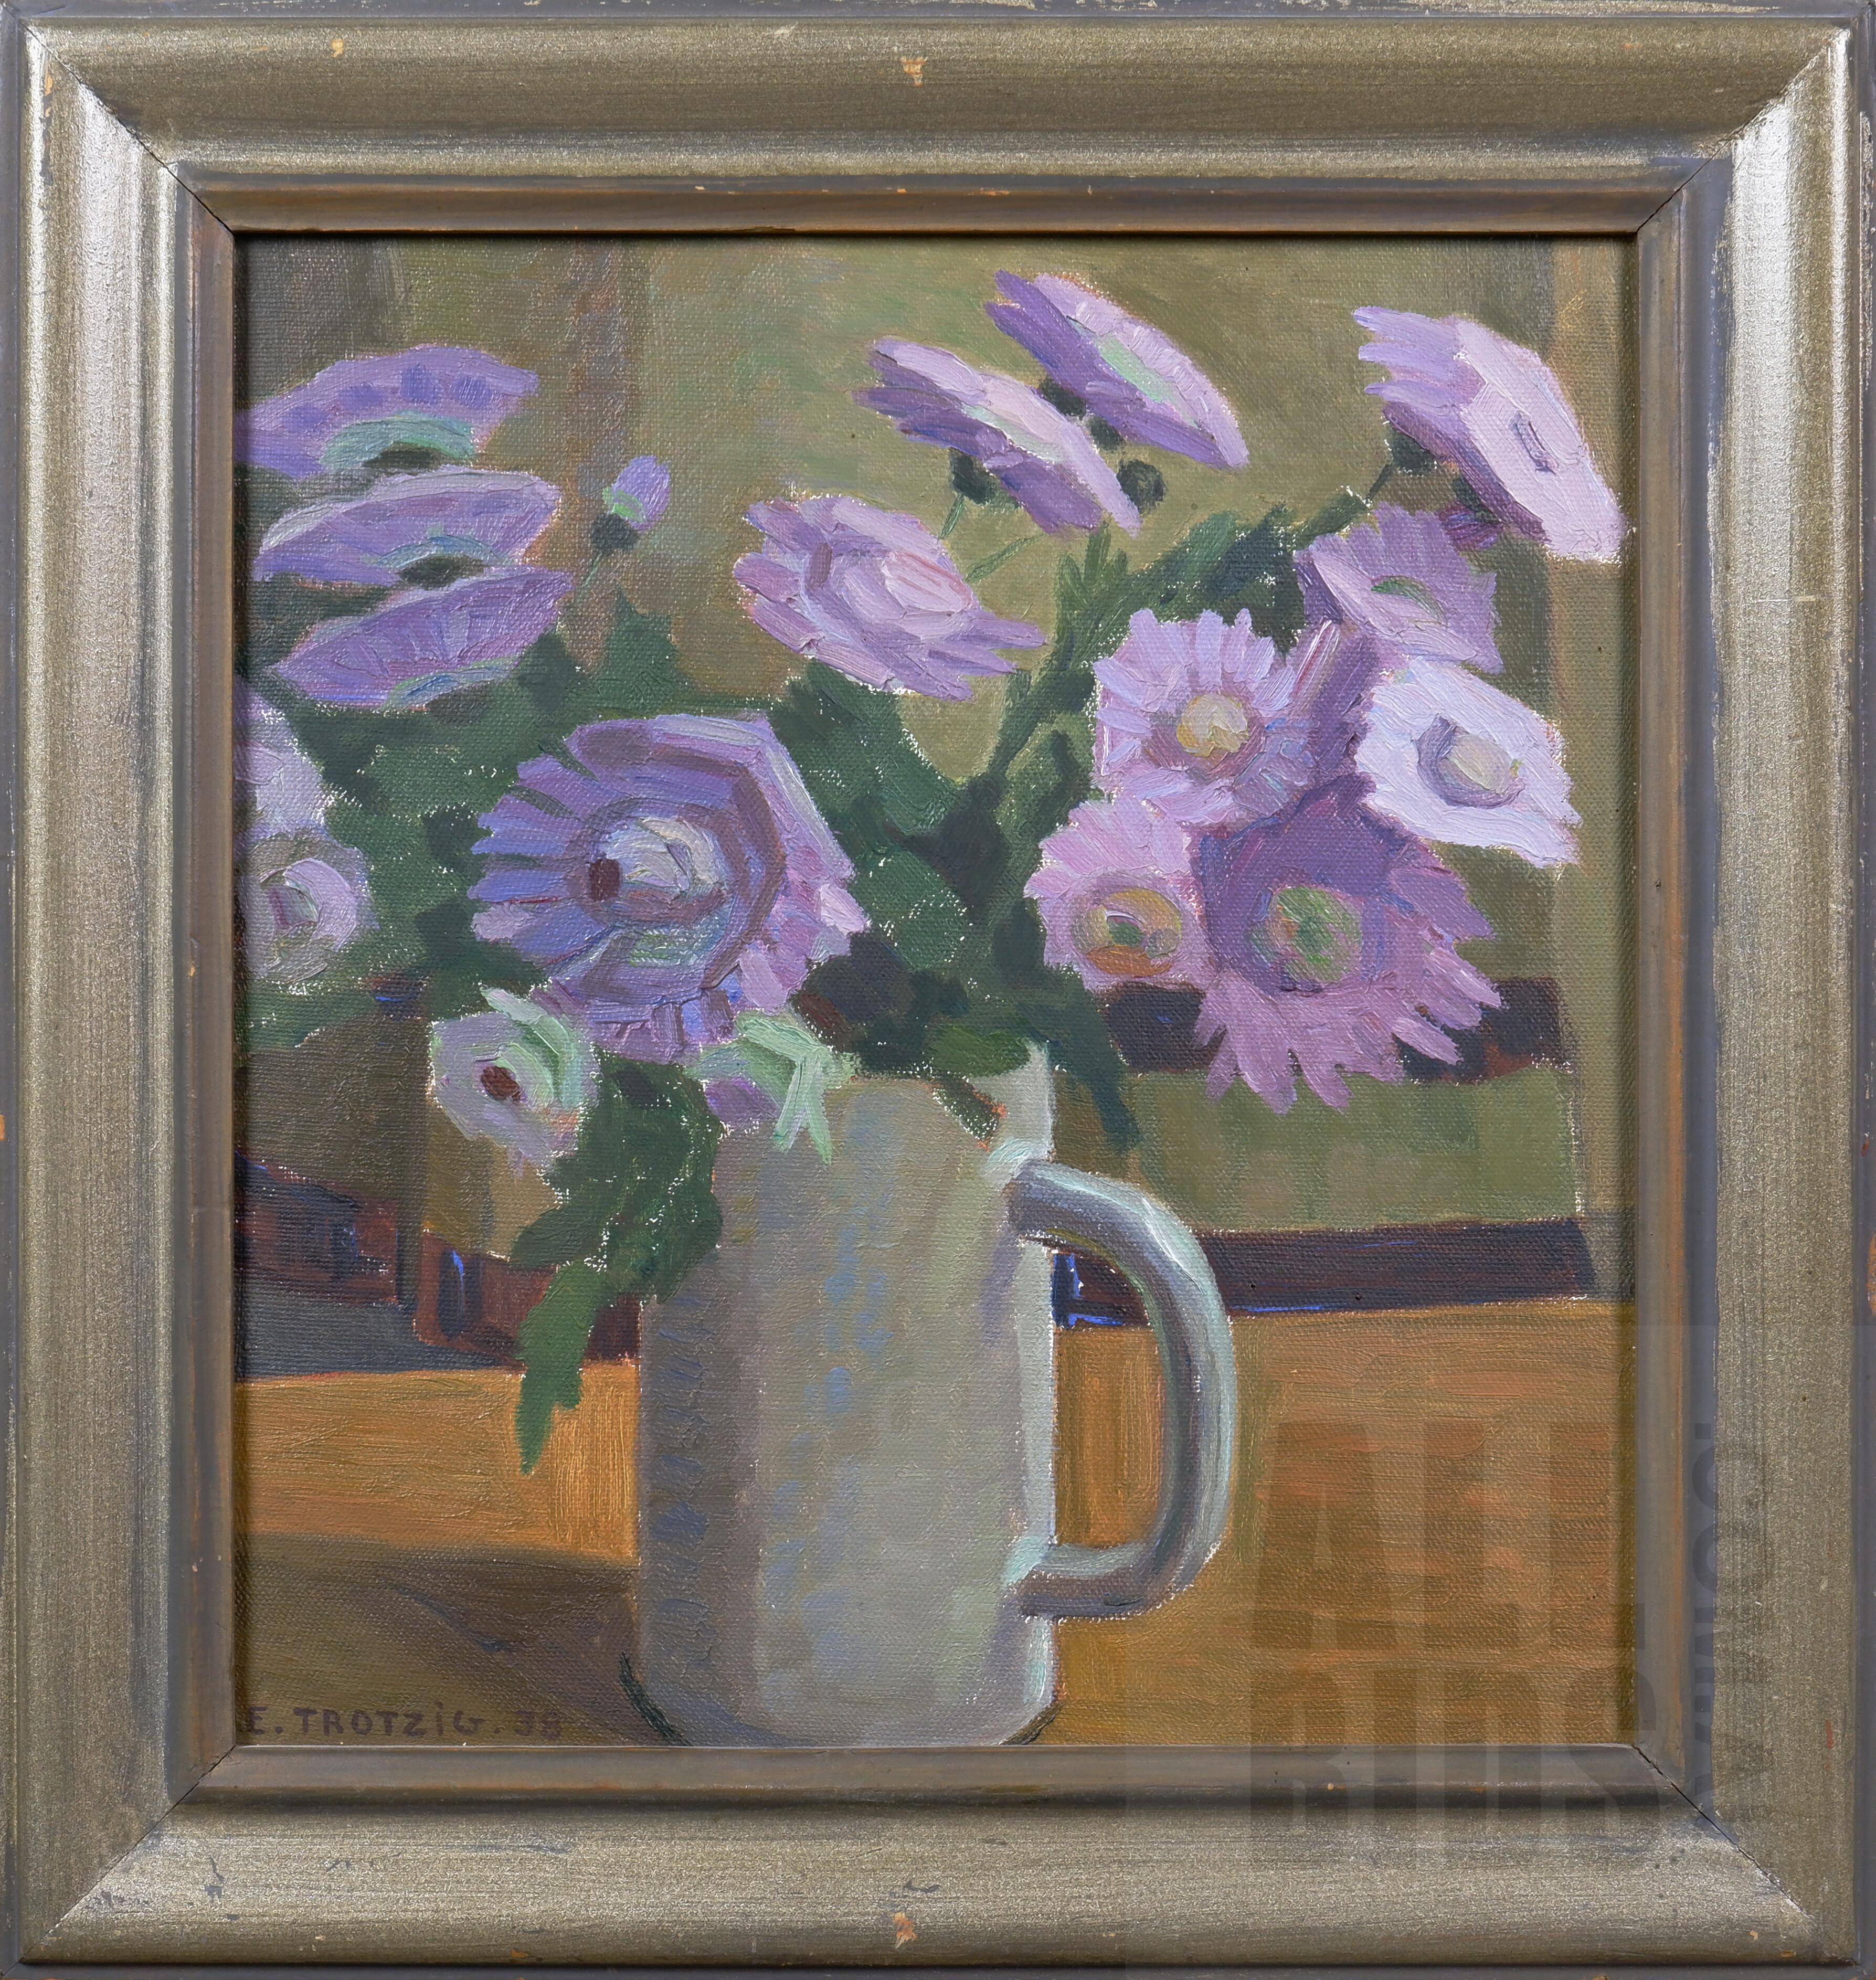 'Ellen Trotzig (1978-1949, Swedish), Still Life with Flowers 1938, Oil on Canvas, 44 x 41 cm (incl. frame)'